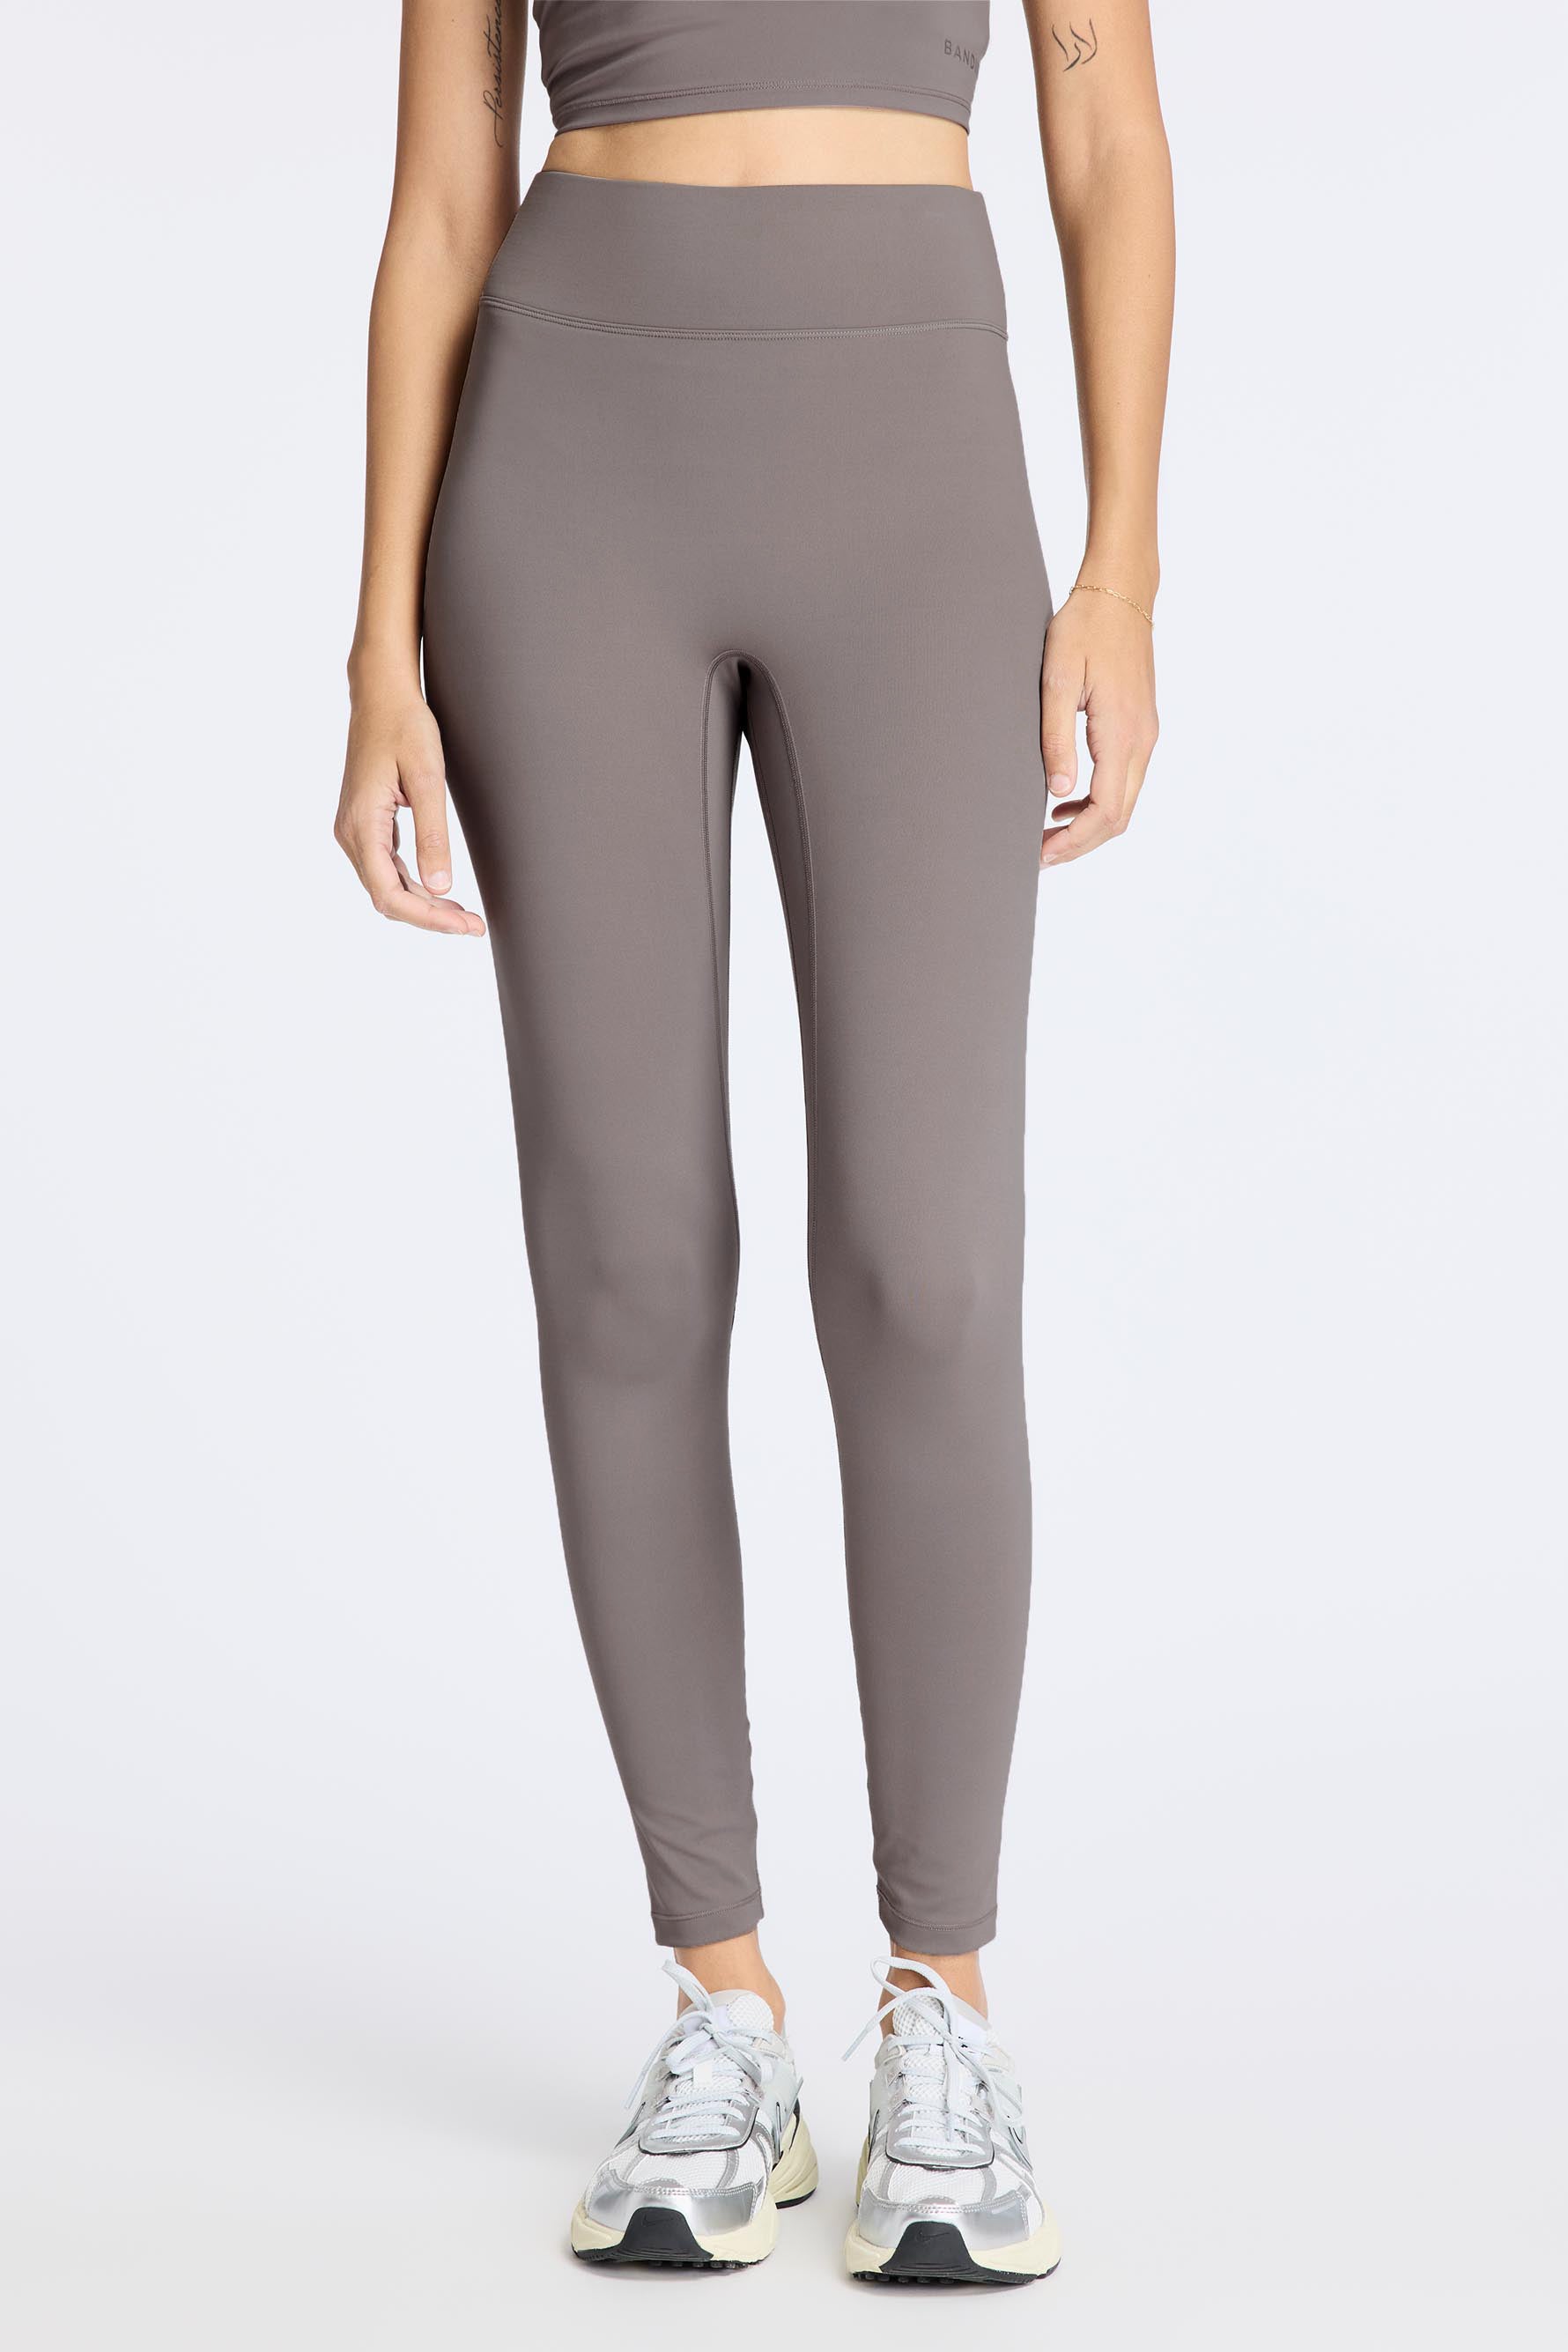 Center Stage Pocket Legging in Baja Blue – Luxe Society Active